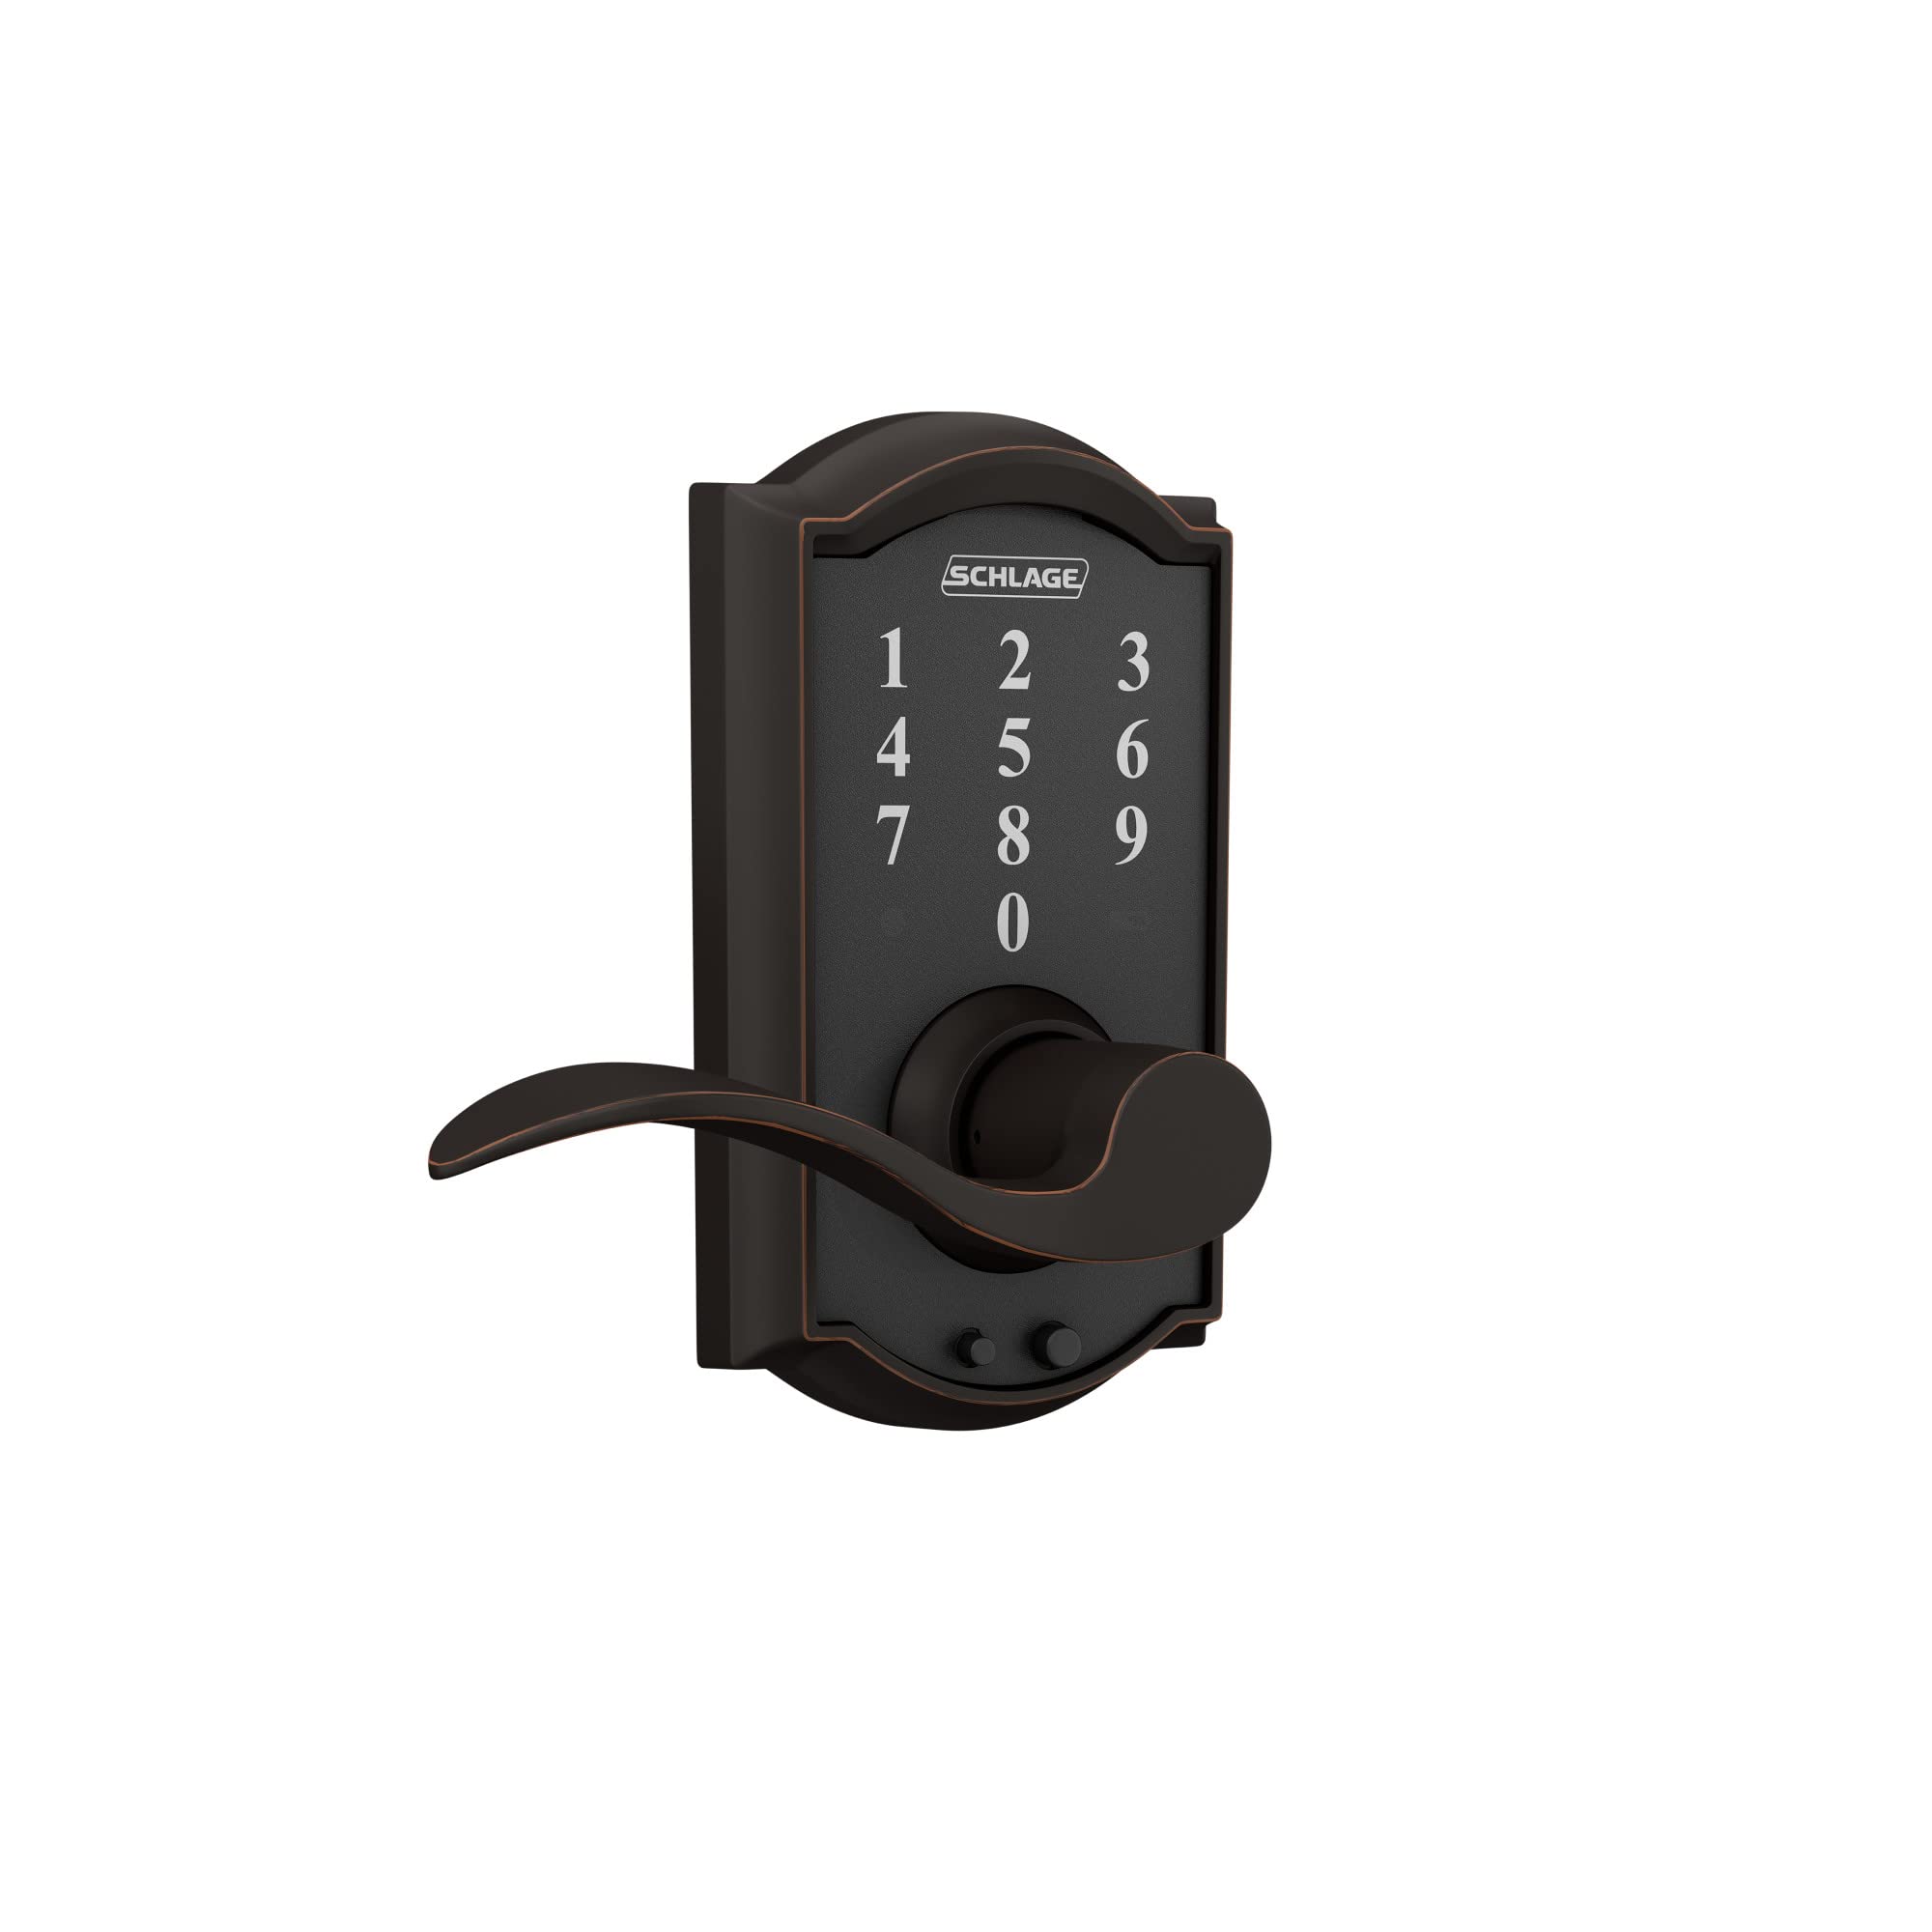 Schlage FE695 CAM 716 ACC Touch Camelot Lock with Accent Lever, Electronic Keyless Entry Lock, Aged Bronze